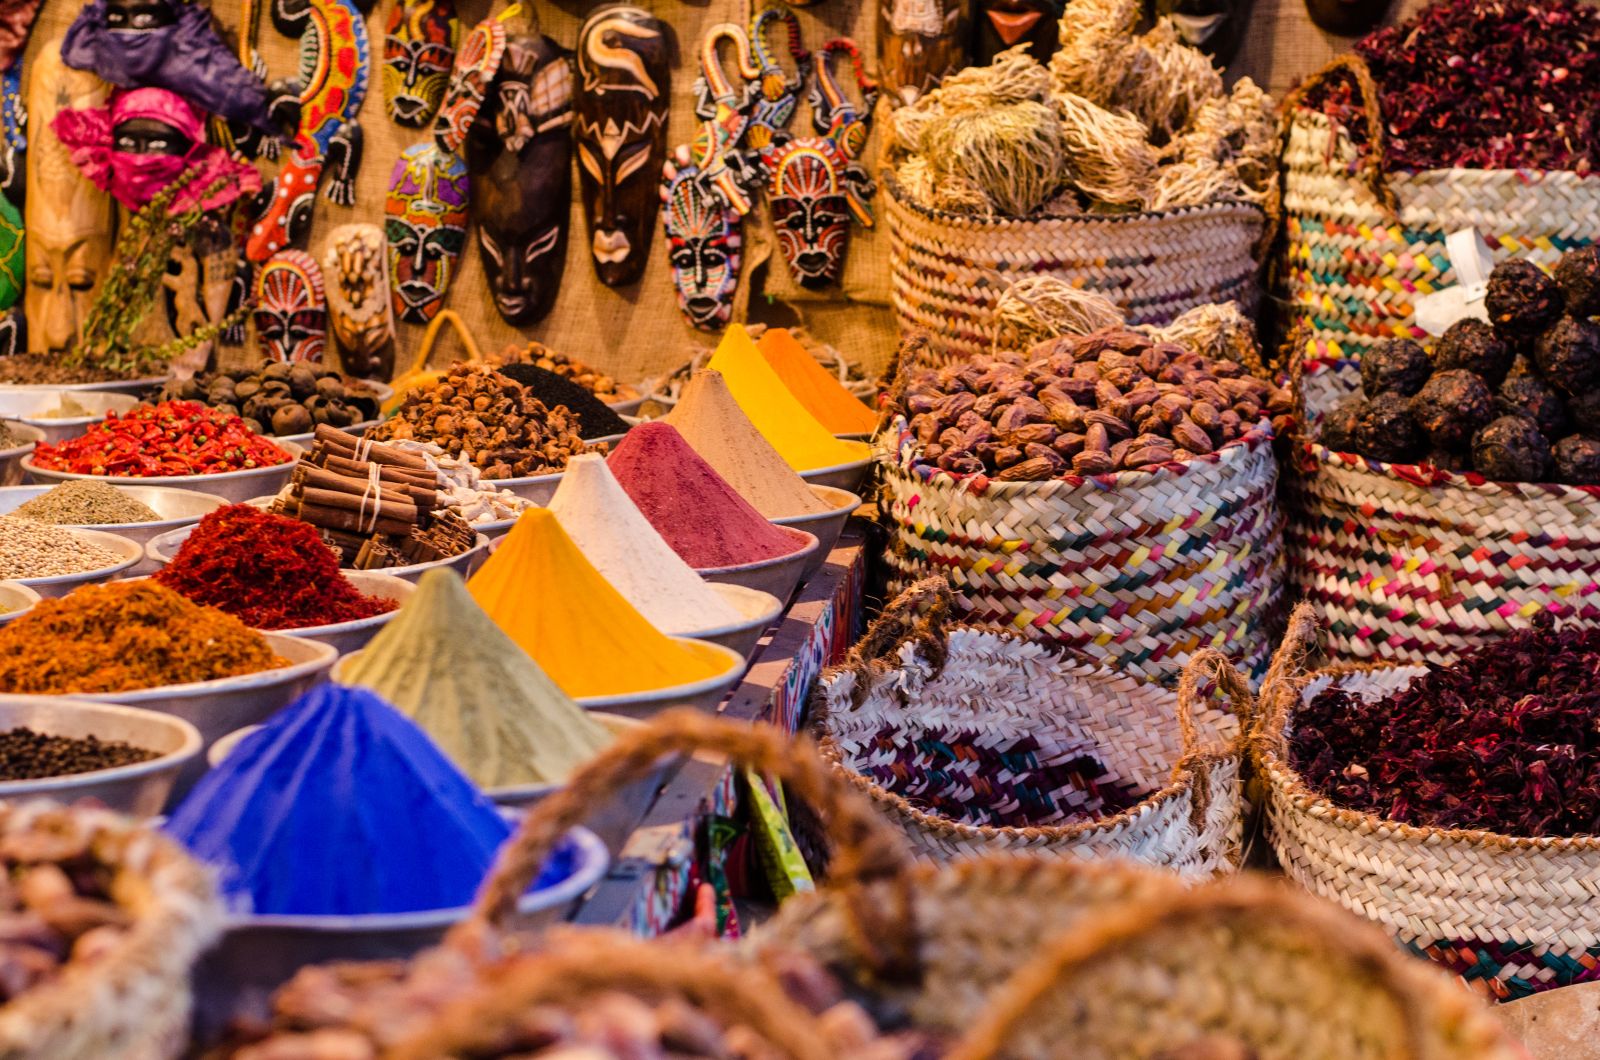 Colourful spices at a traditional bazaar in Egypt